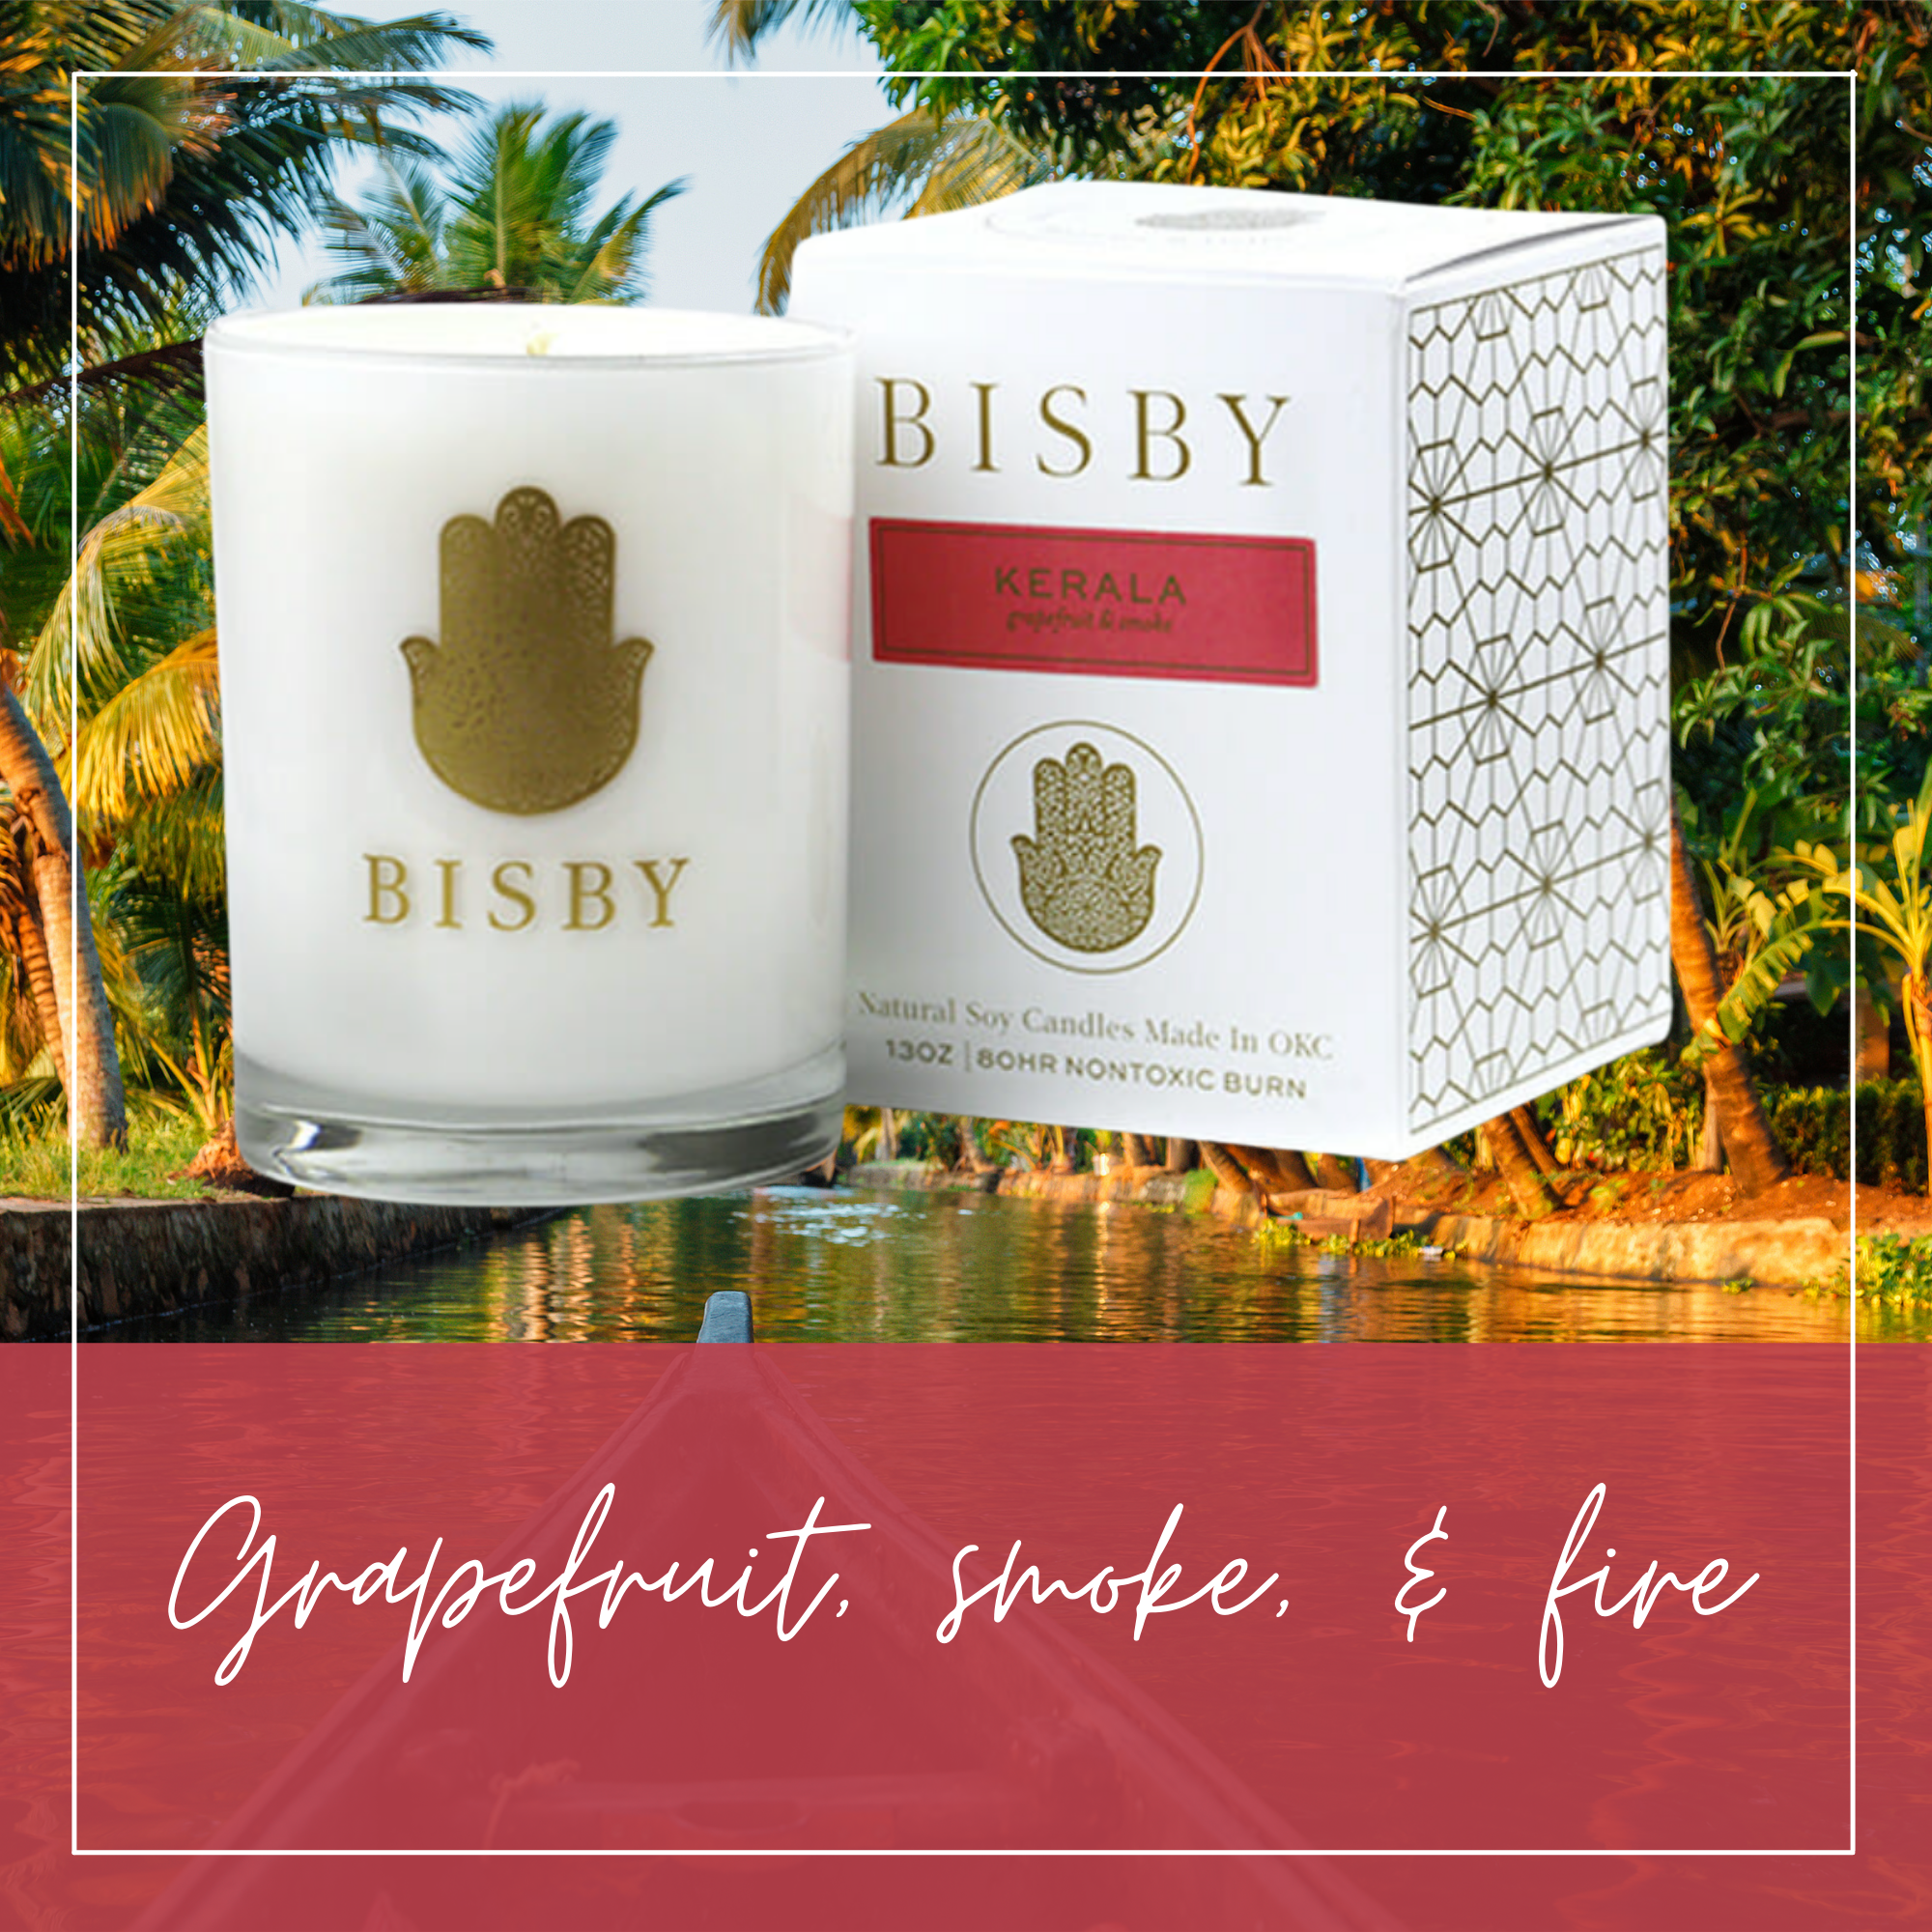 Bisby Hand-Poured Soy Candles - Global Collection Kerala 